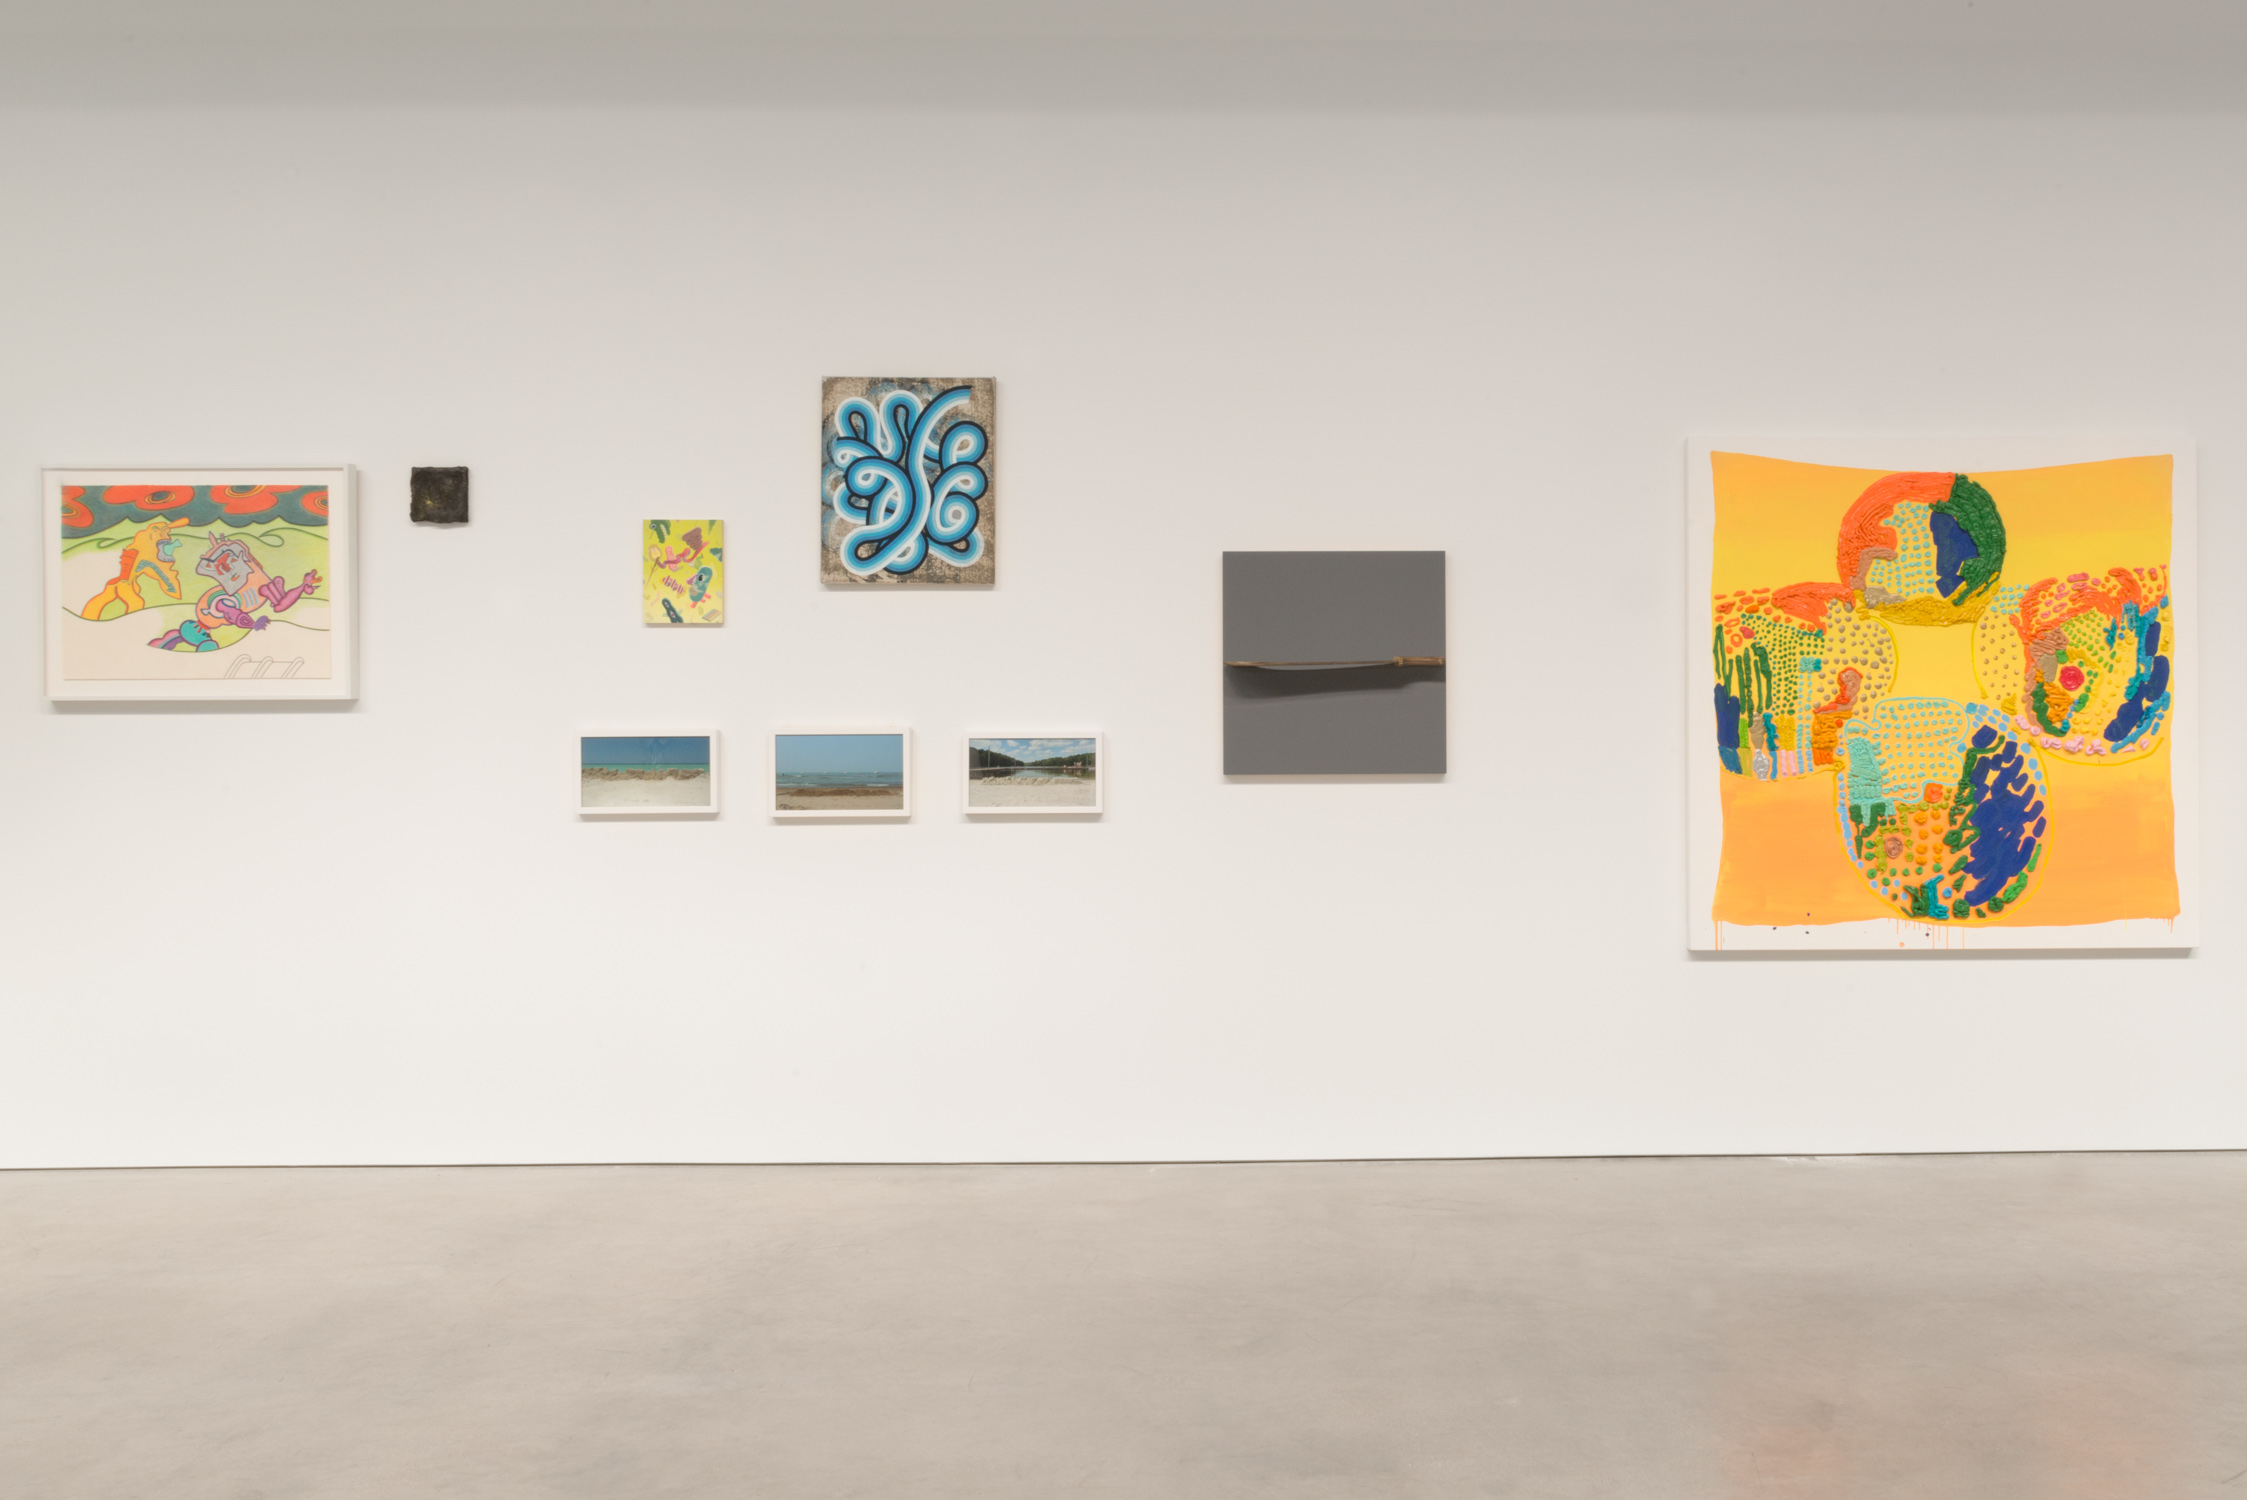 Shane Campbell Gallery "Chicago and Vicinity" installation view